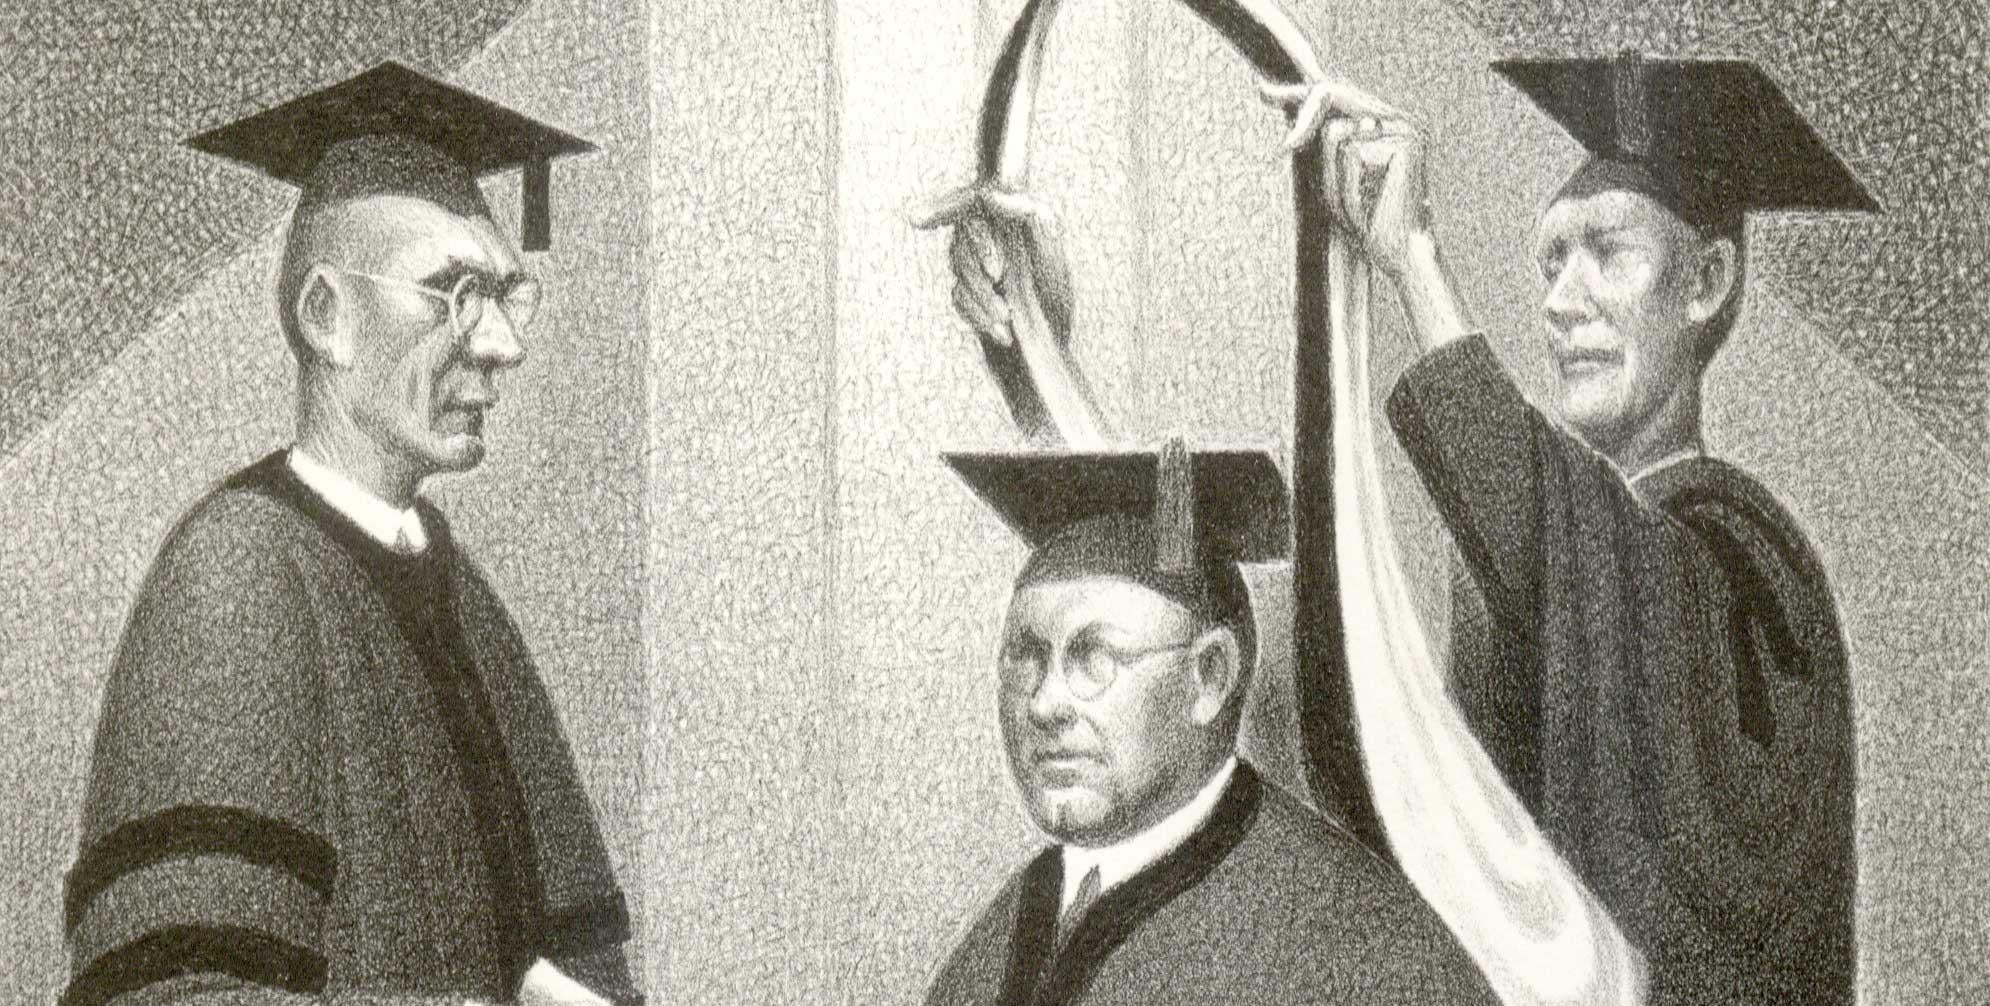 This rare self portrait of Grant Wood shows him being awarded an honorary degree as sun shines through a window.  The President of the university is handing Wood the degree while the academic marshall lifts the hood over Wood's head.  As we start